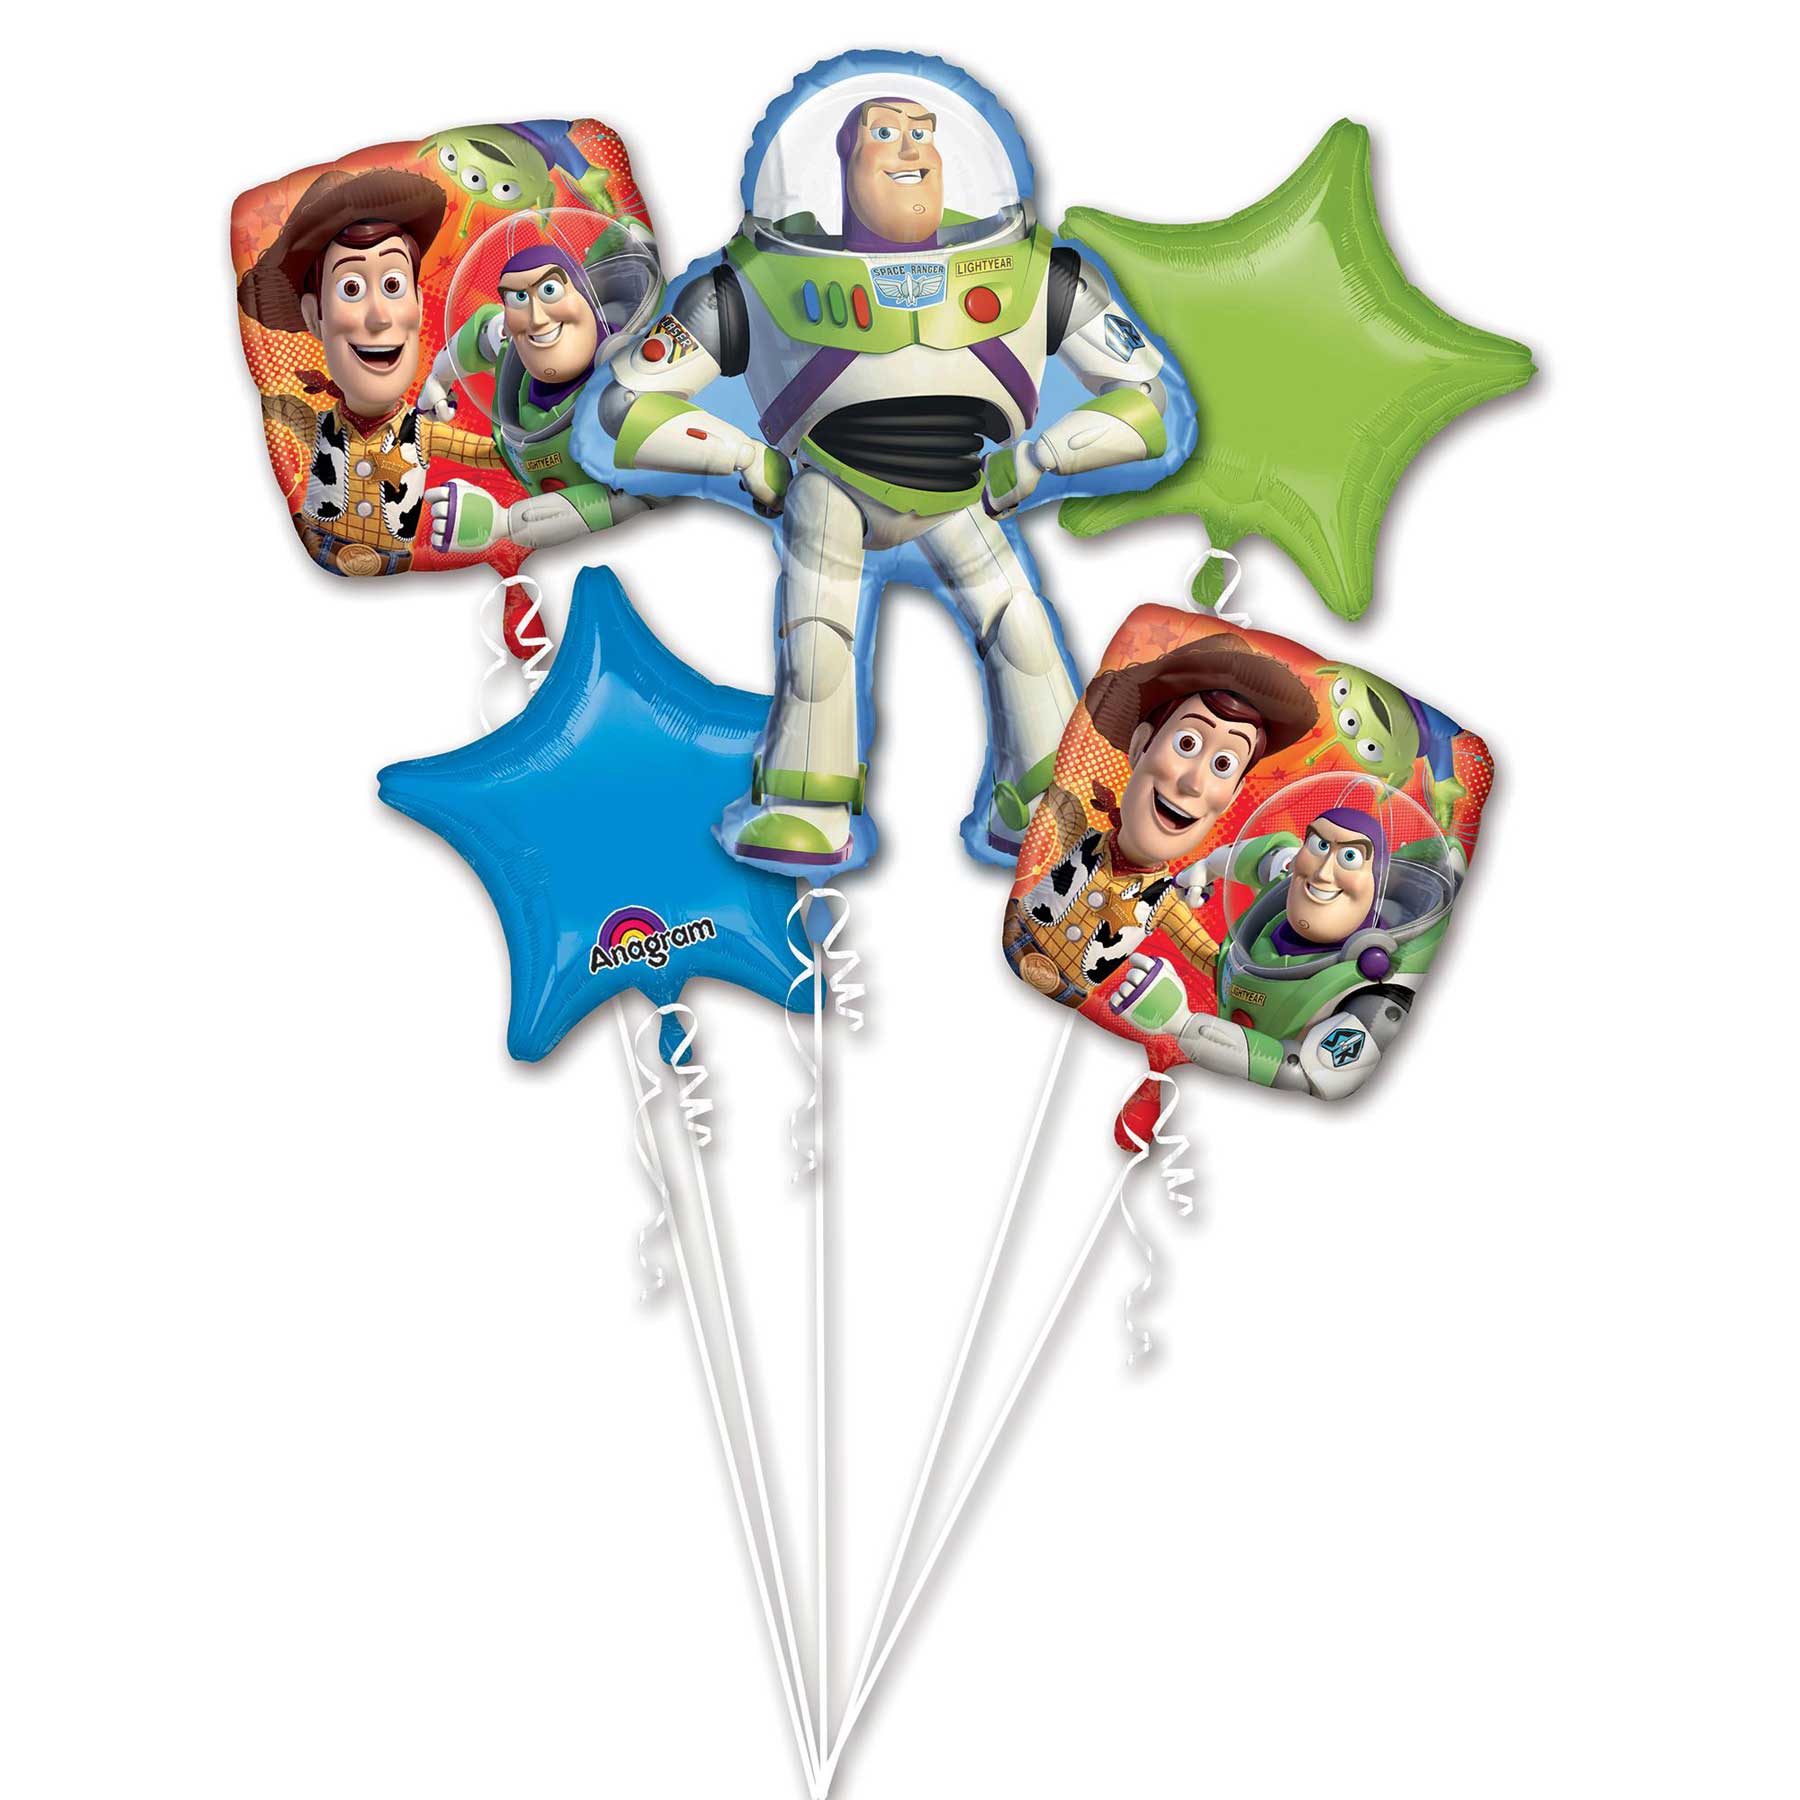 Toy Story Gang Balloon Bouquet 5pcs Balloons & Streamers - Party Centre